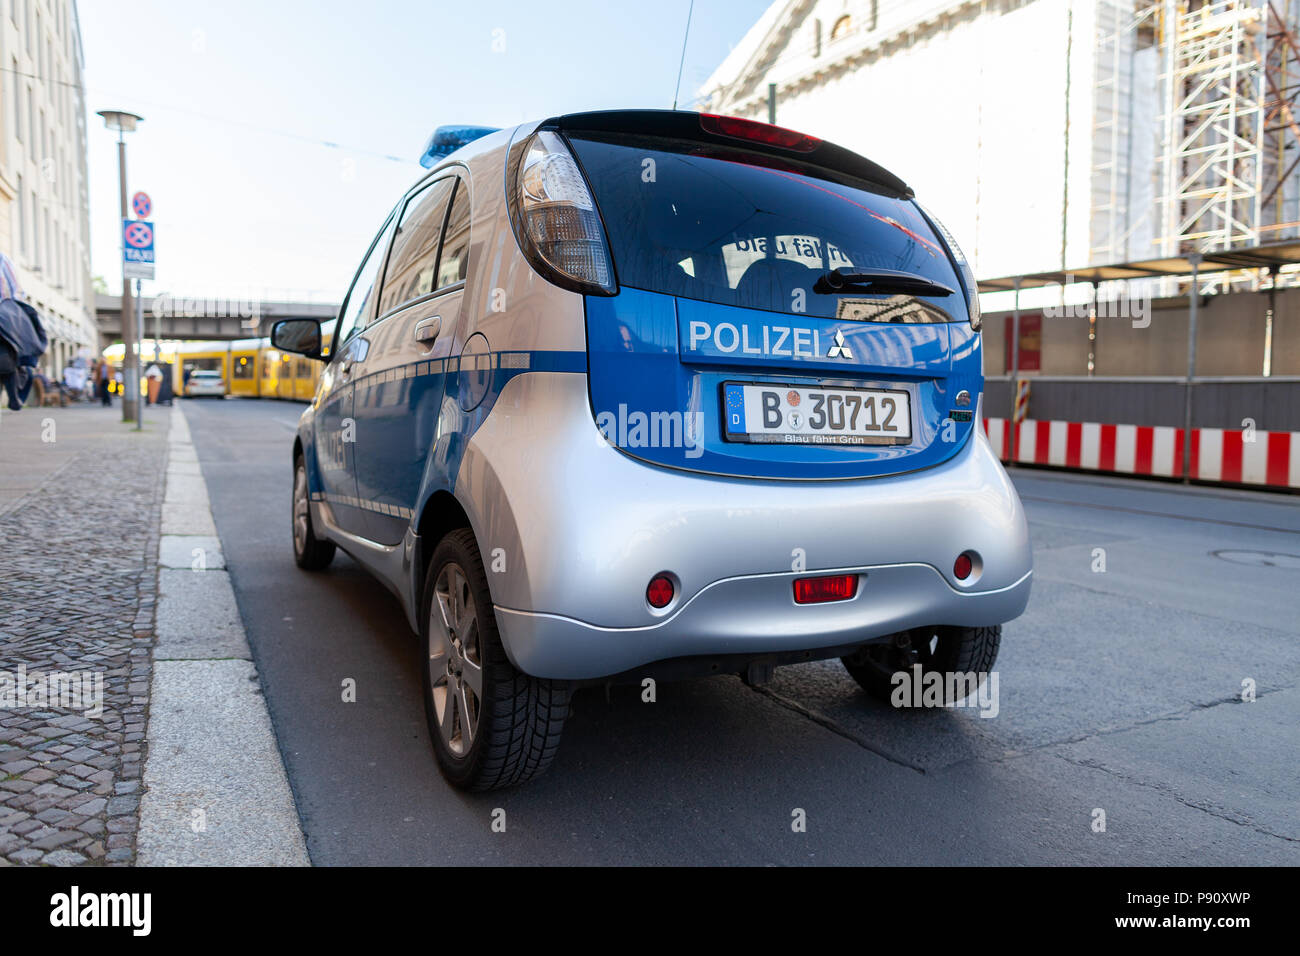 BERLIN / GERMANY - APRIL 29, 2018: Electric german police car, Mitsubishi MiEV stands on a street in Berlin. Polizei is the german word for police. Stock Photo